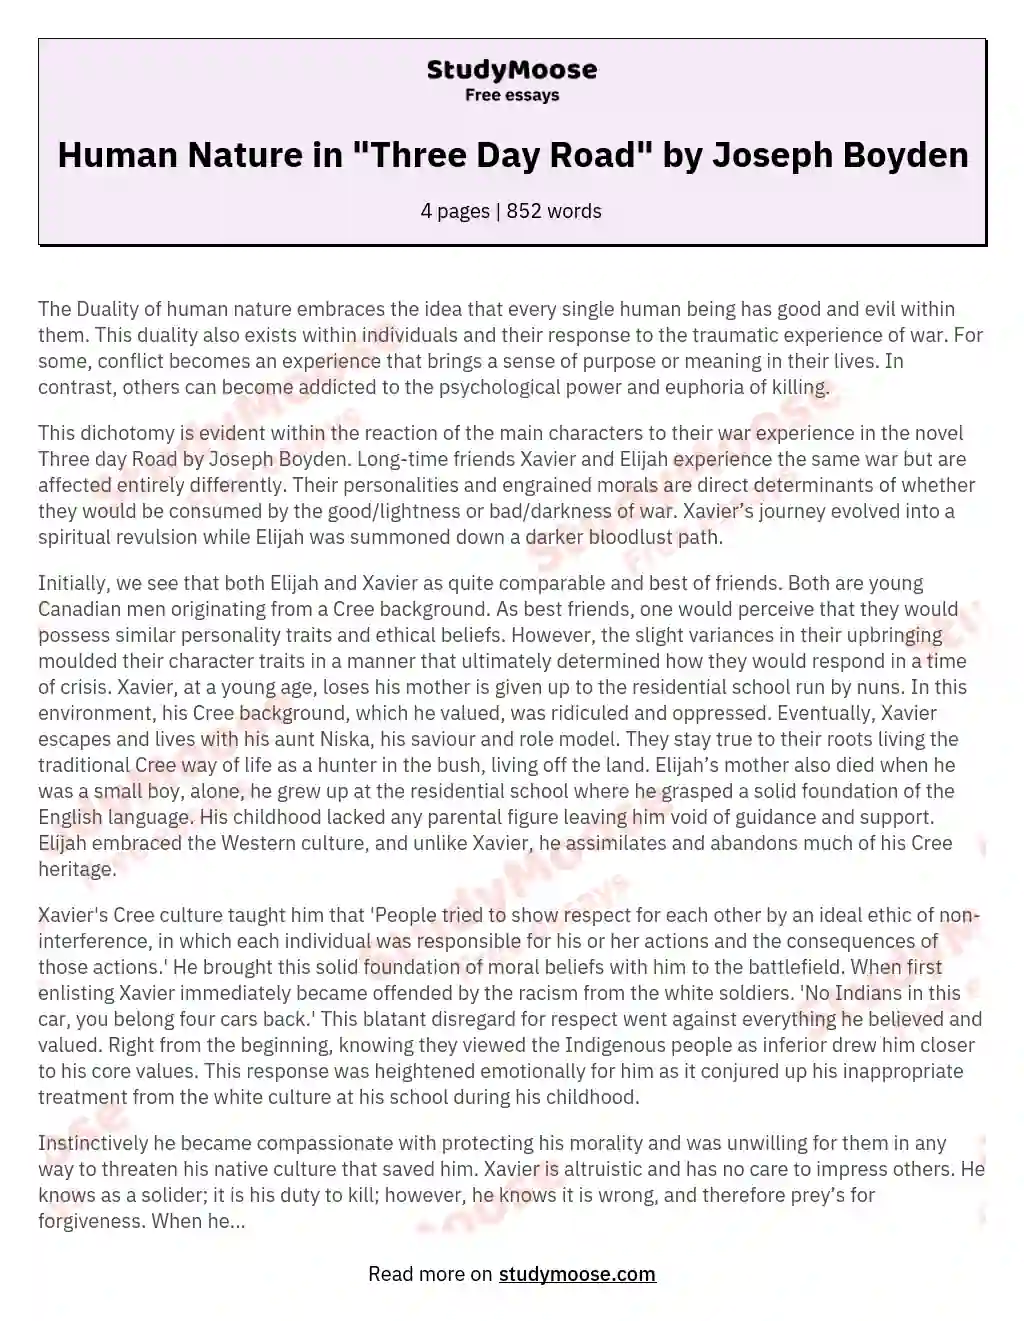 Human Nature in "Three Day Road" by Joseph Boyden